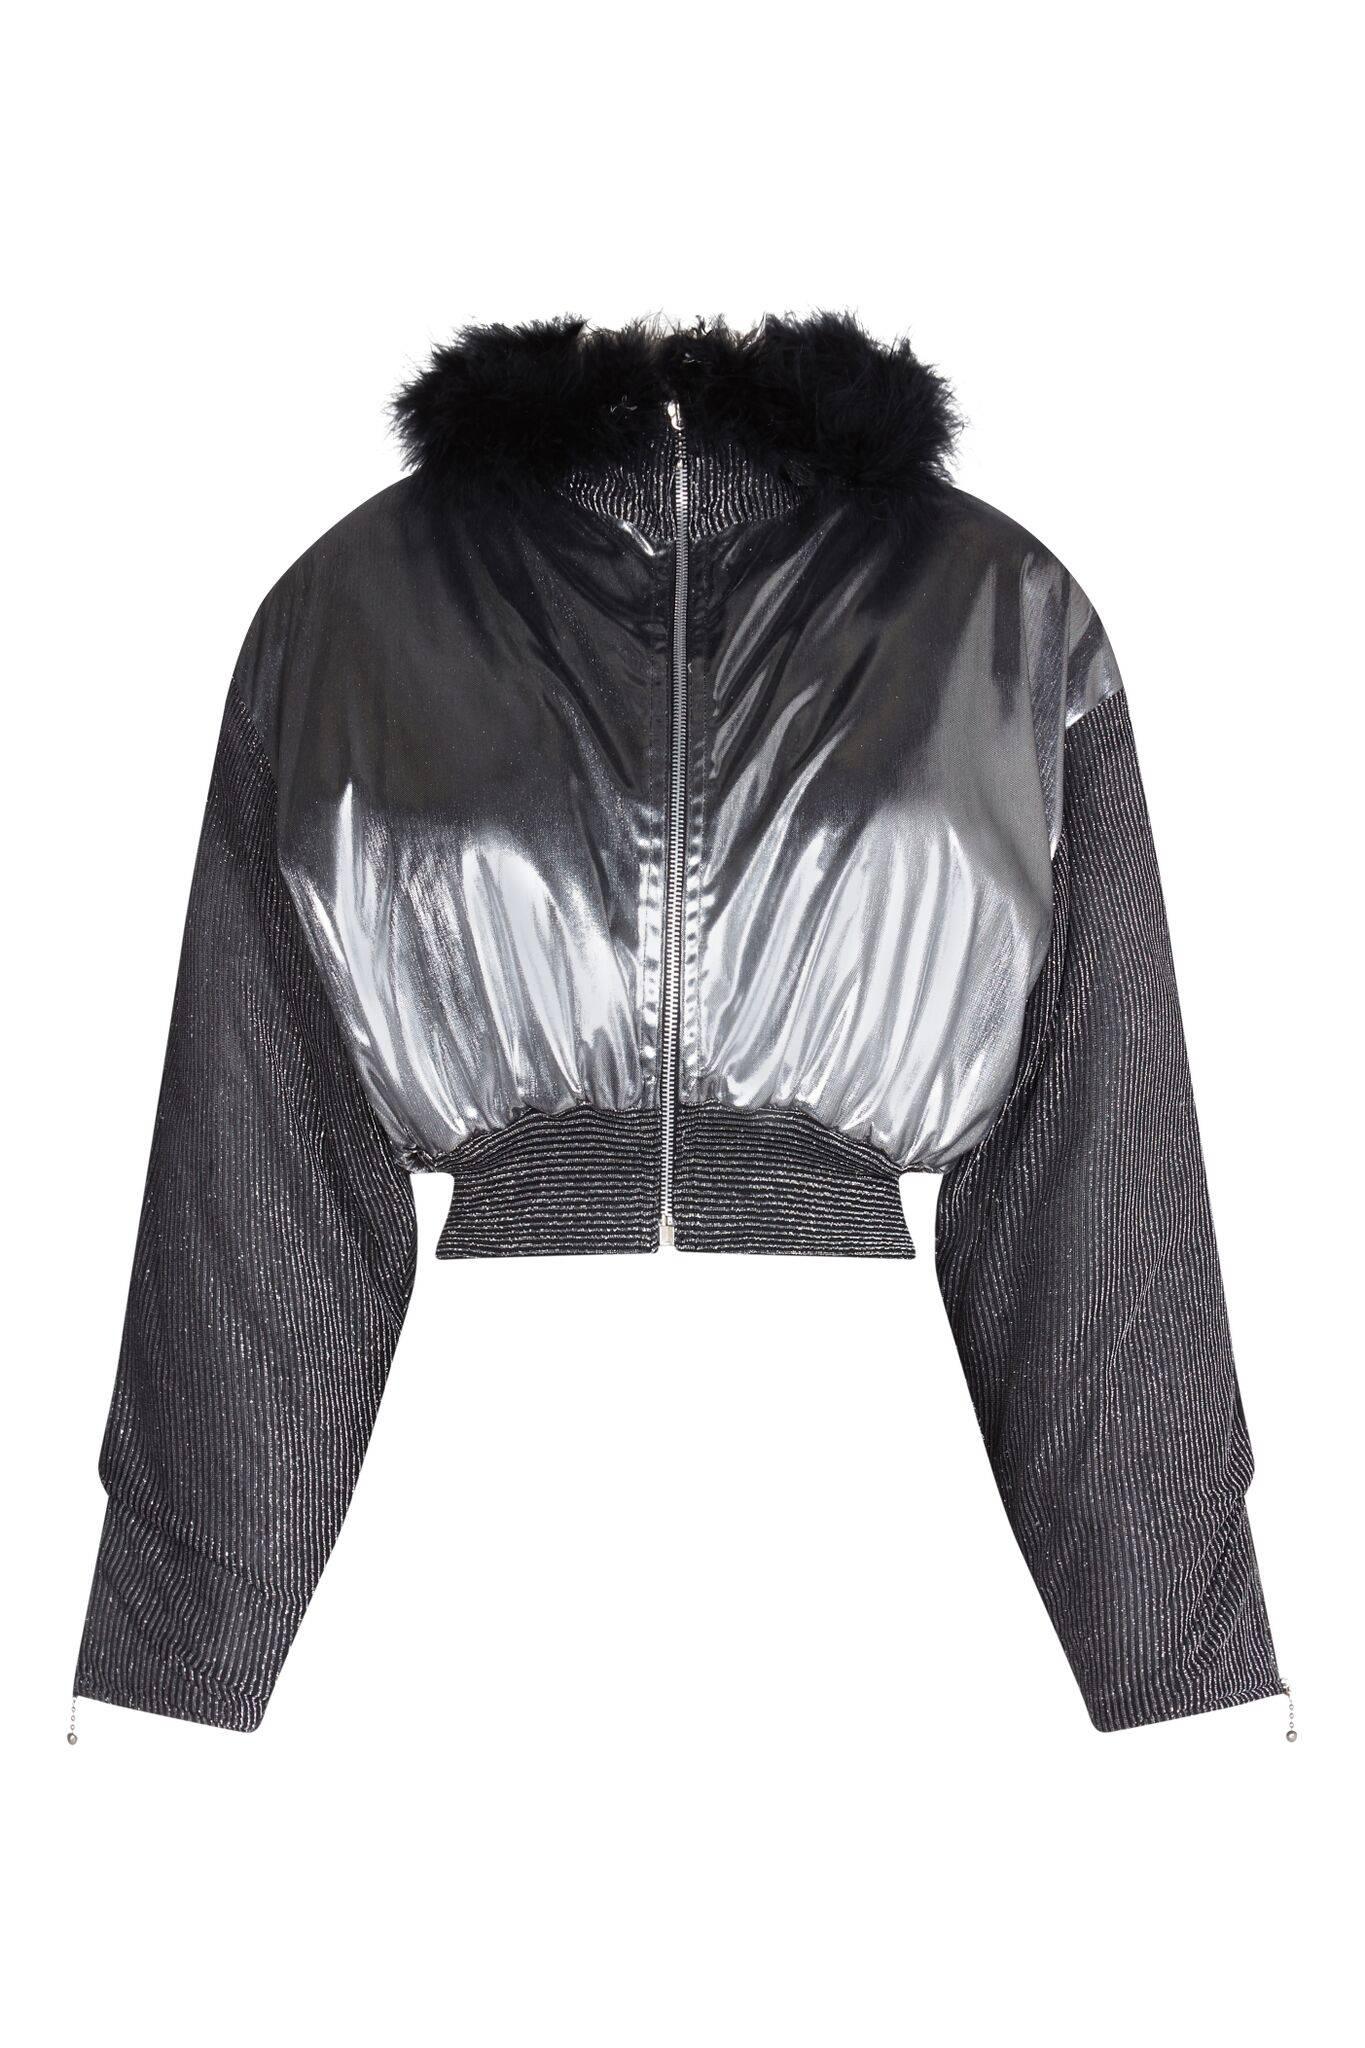 This striking 1980s silver hooded jacket is in superb condition and makes a wonderful statement piece. The metallic, liquid silver effect fabric has a futuristic feel whilst the sleeves, hooded collar and waistband are of a finely ribbed black and